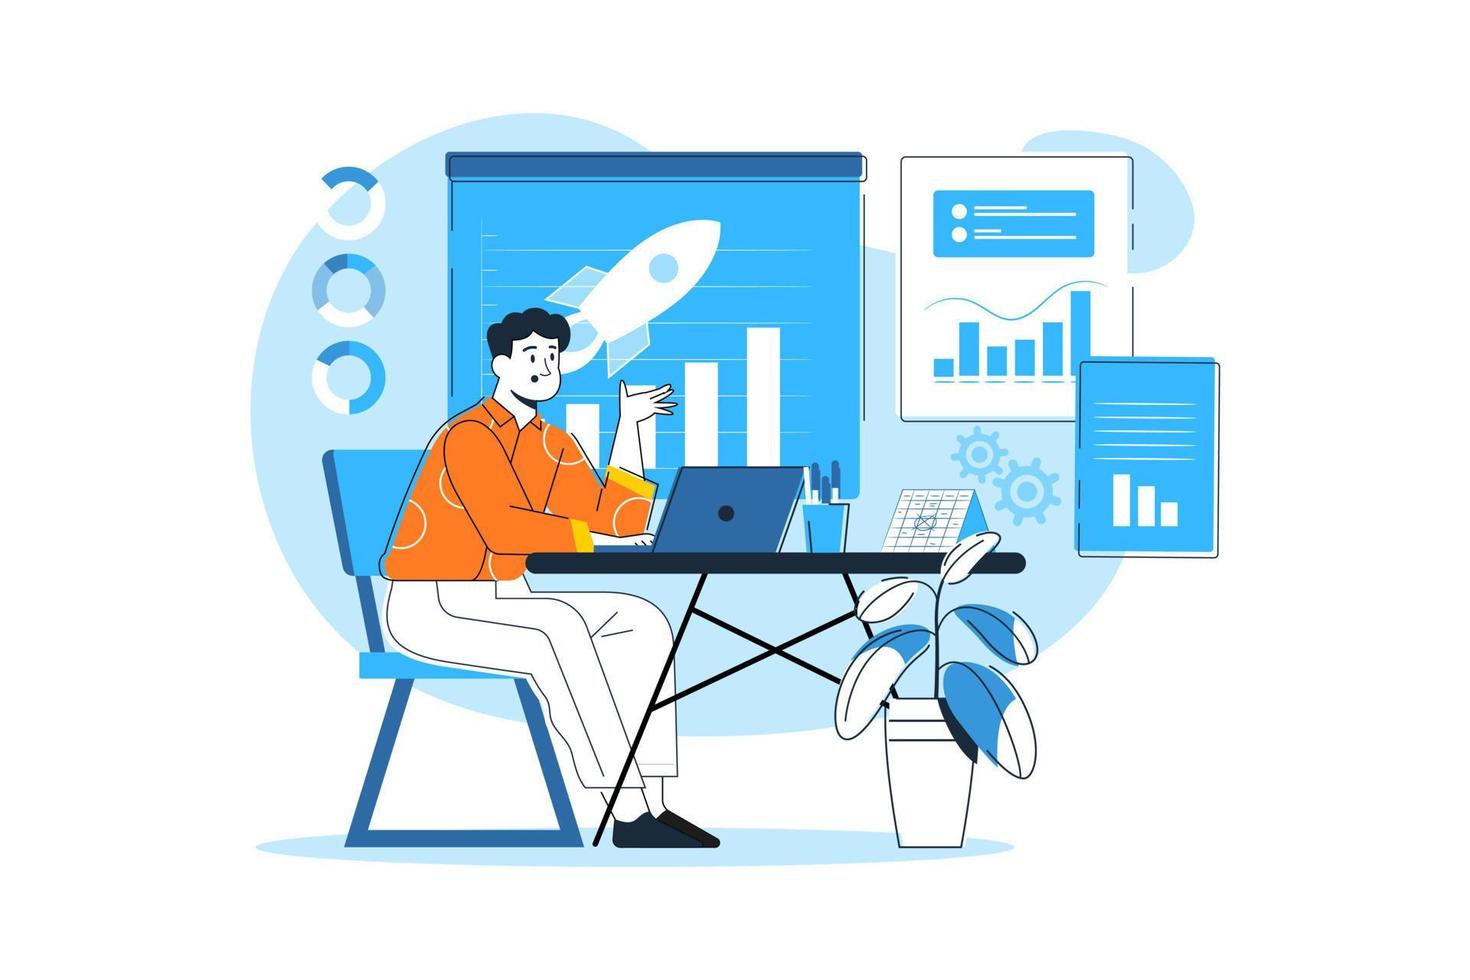 Man working on the business goal vector